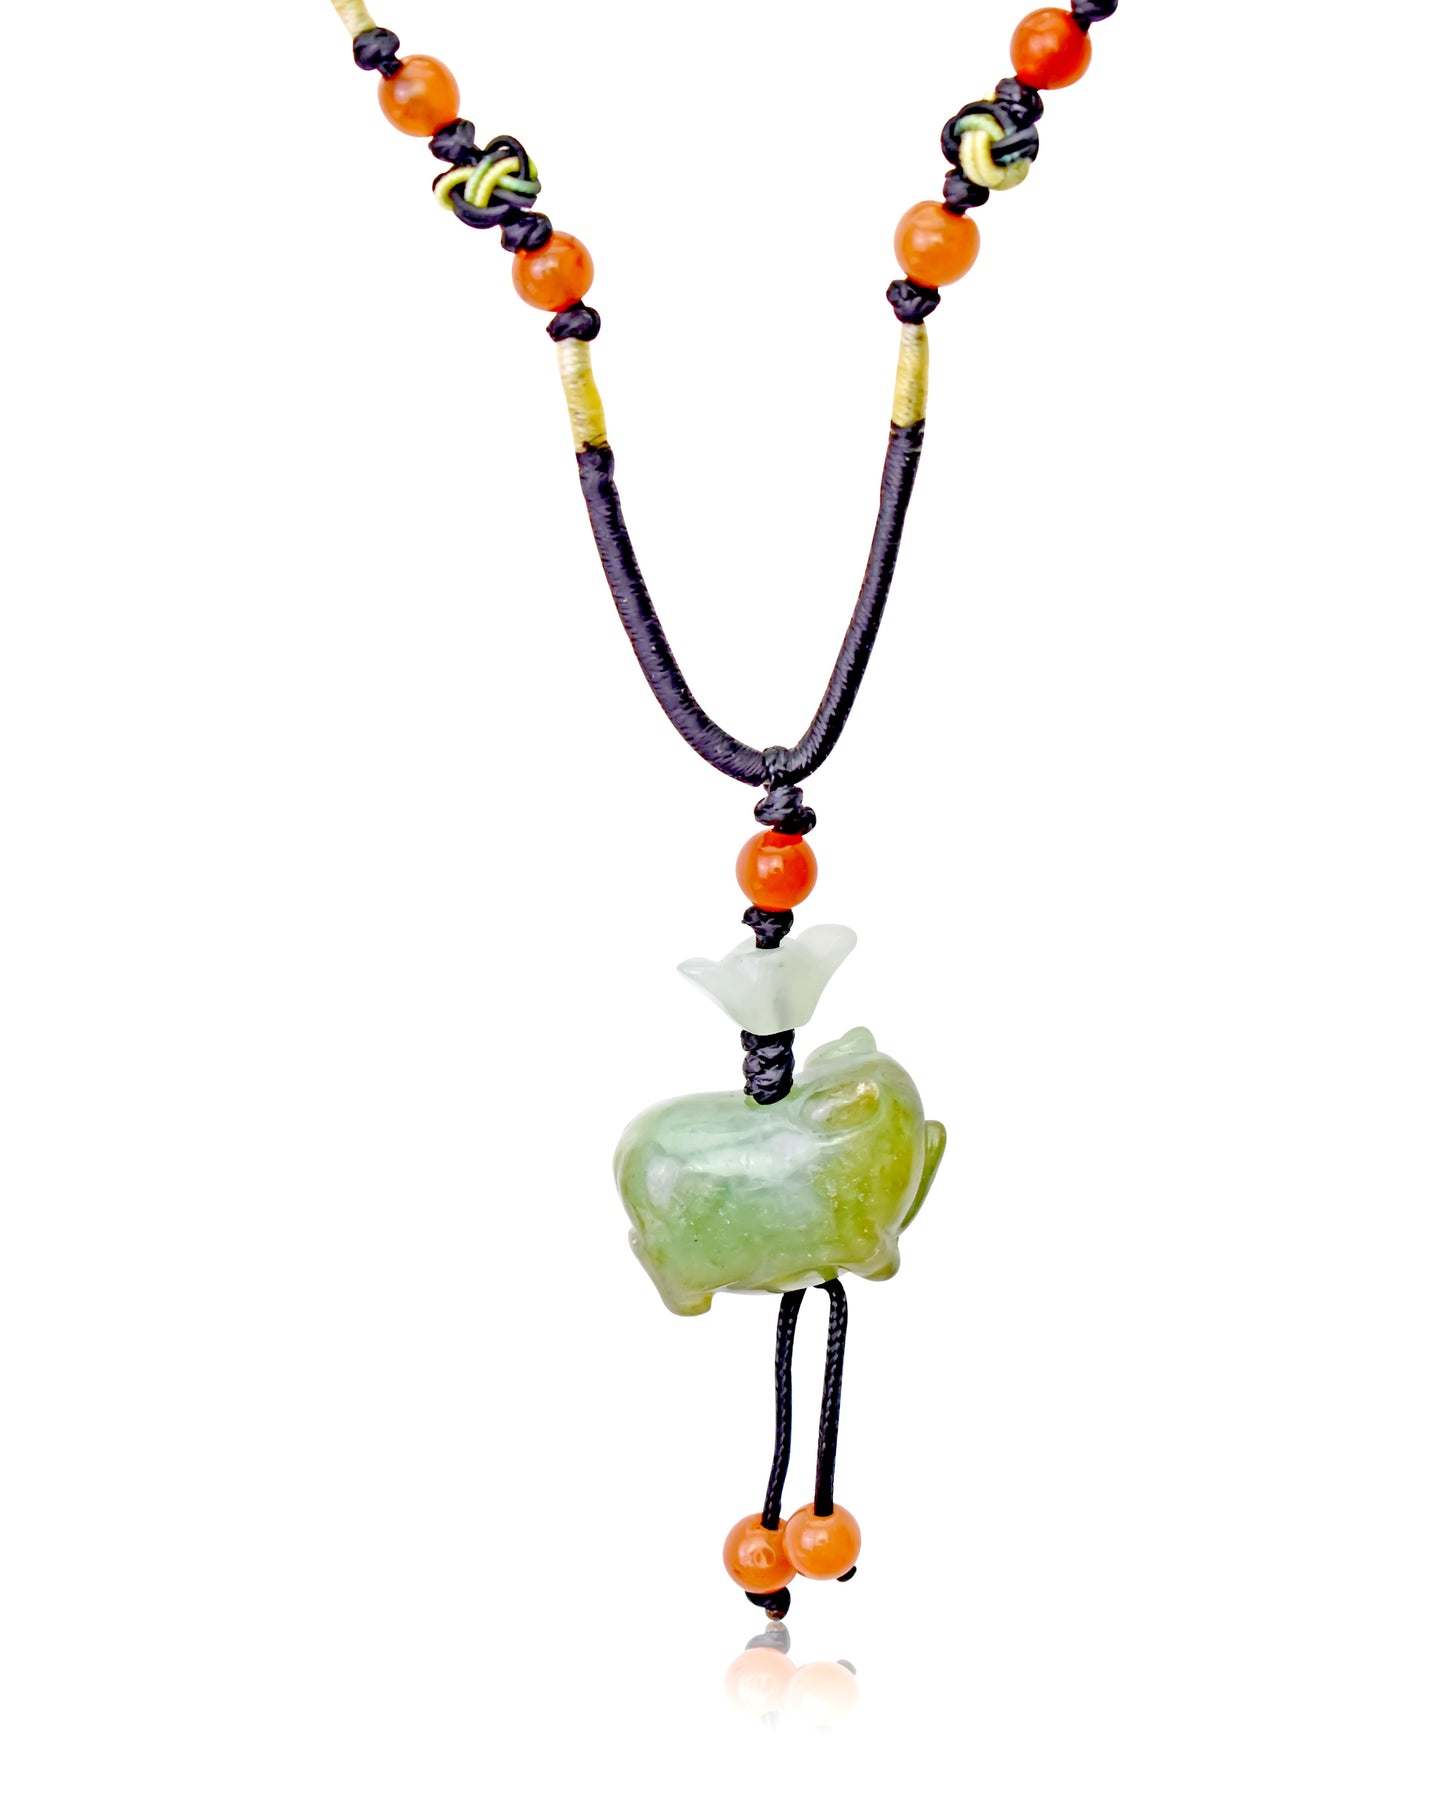 Wear your Boar Chinese Zodiac Proudly with a Handmade Jade Necklace